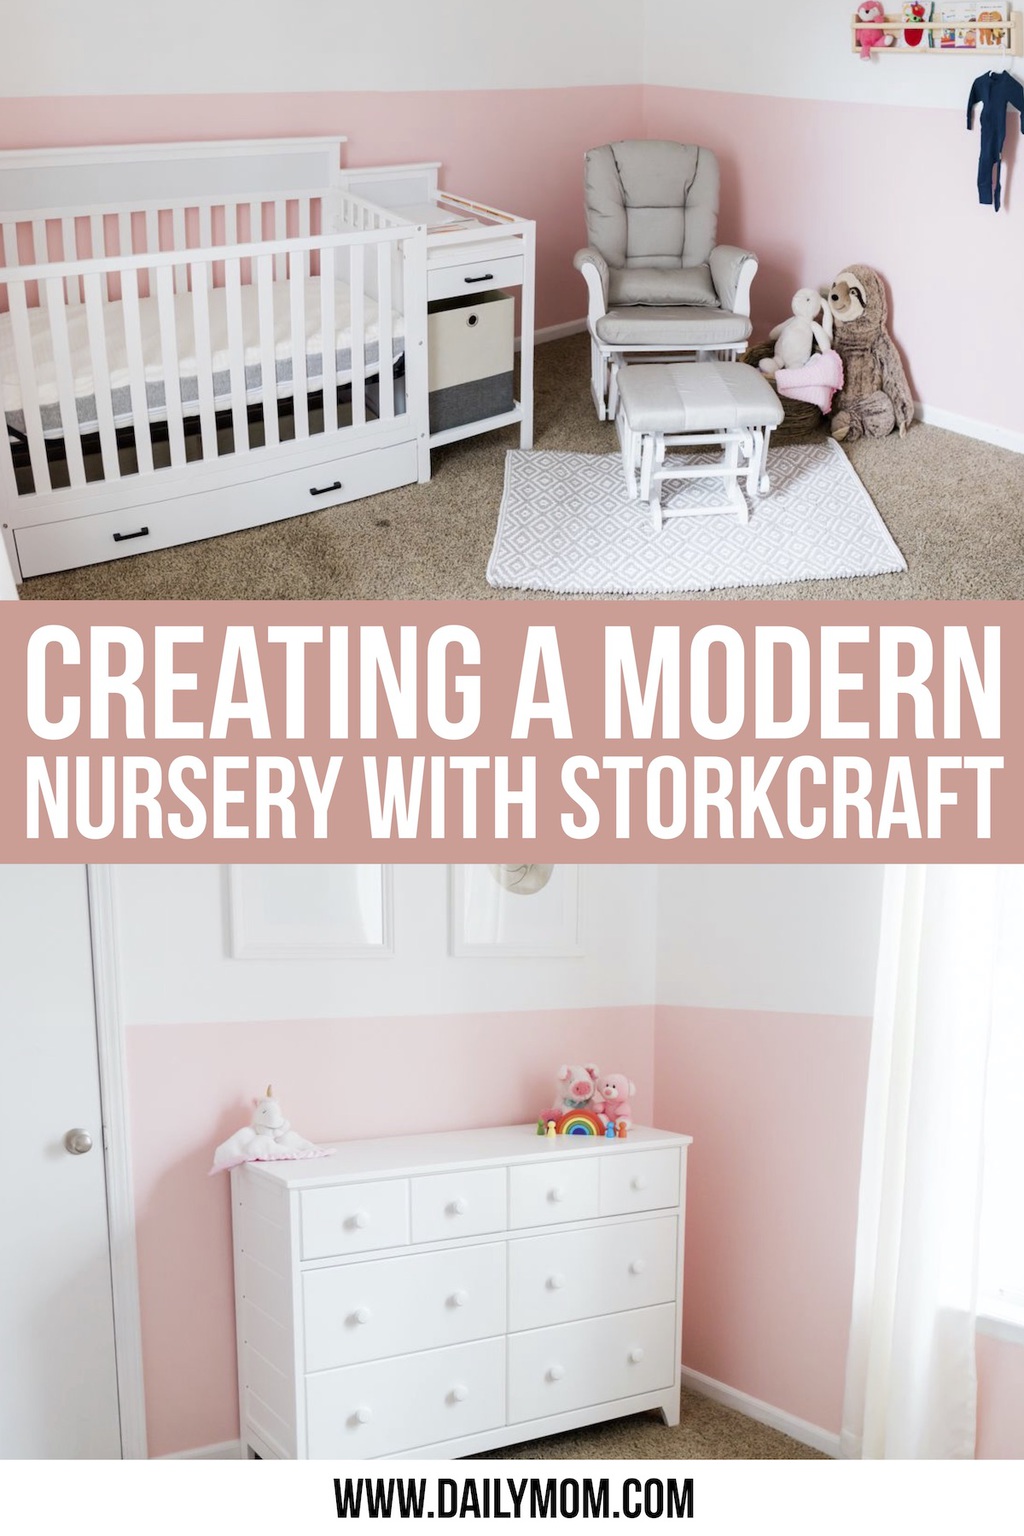 https://dailymom.com/portal/wp-content/uploads/2020/12/Creating-a-Modern-and-Safe-Nursery-with-Storkcraft.jpg